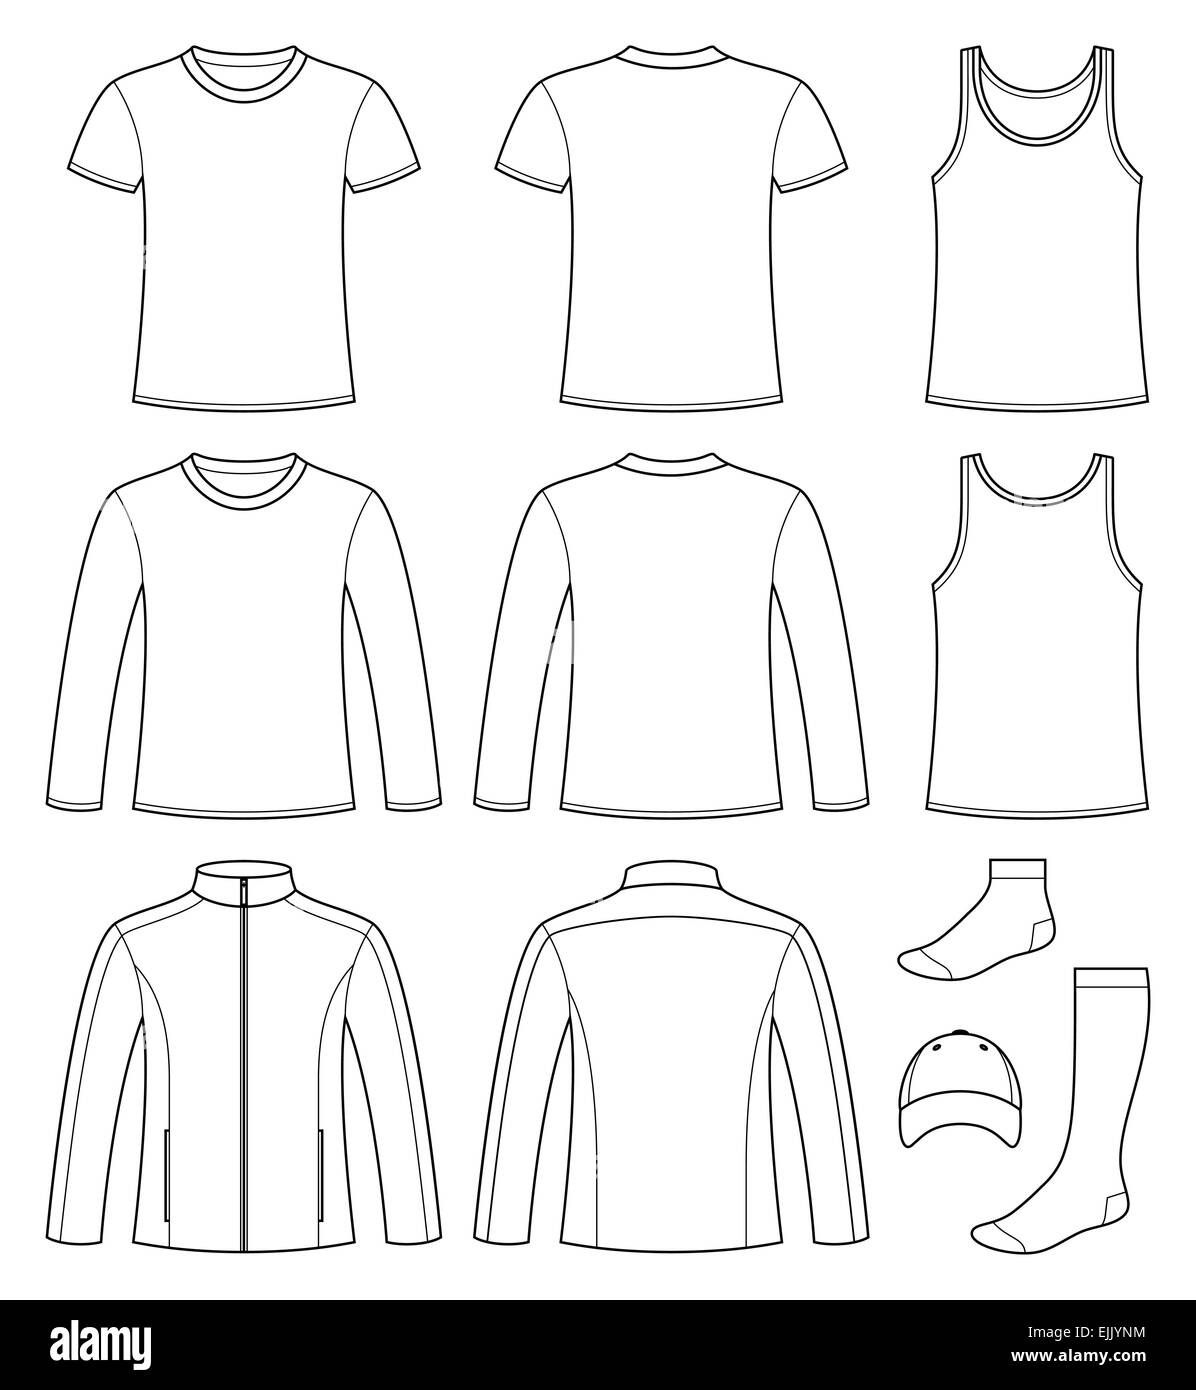 Singlet, T-shirt, Long-sleeved T-shirt, Jacket, Socks and Cap template - front and back isolated on white background Stock Photo